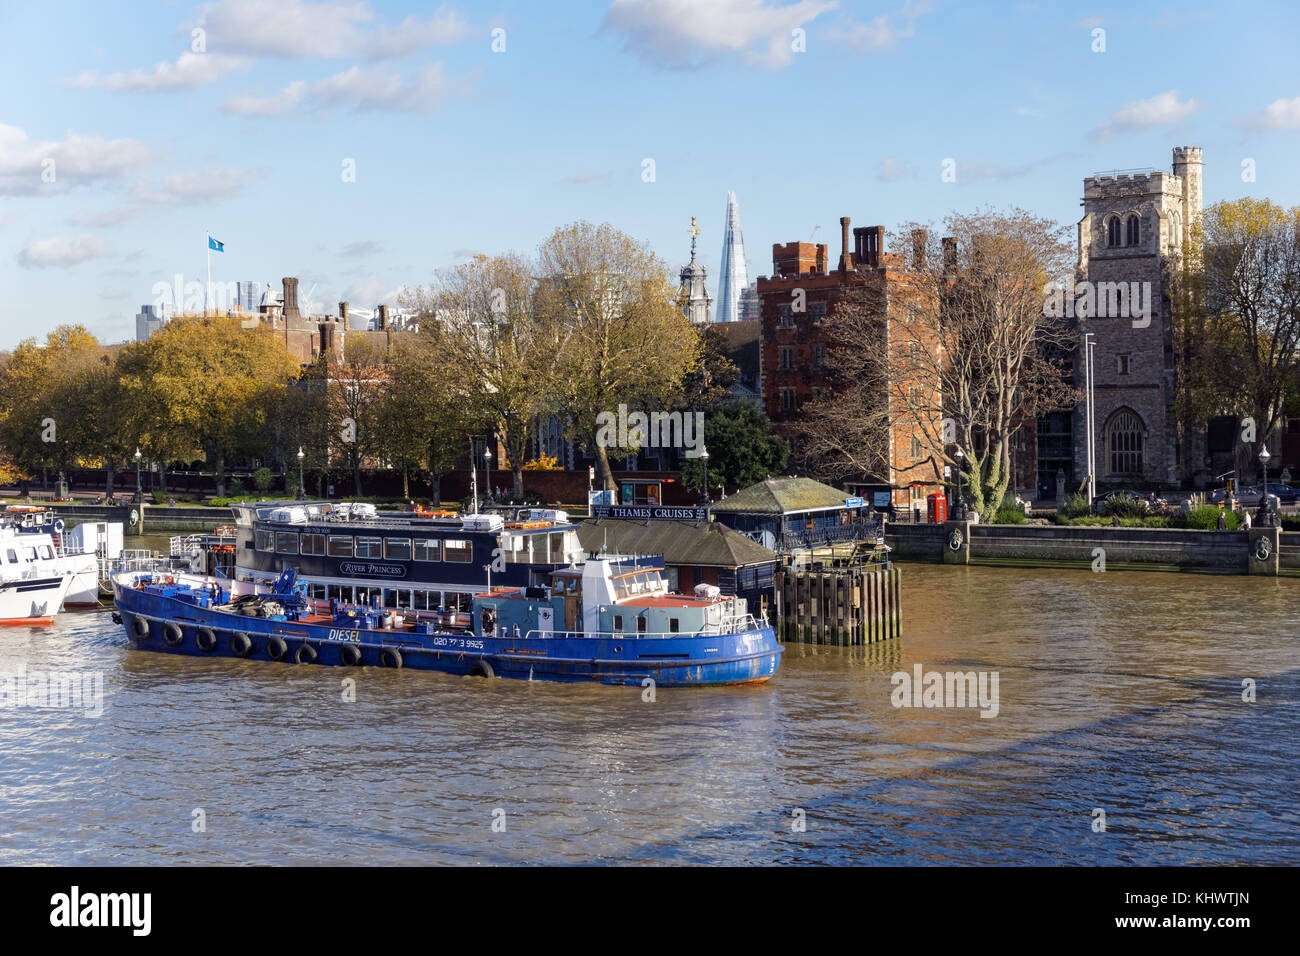 The River Thames with the Morton's Tower and Garden Museum in Lambeth, London England United Kingdom UK Stock Photo